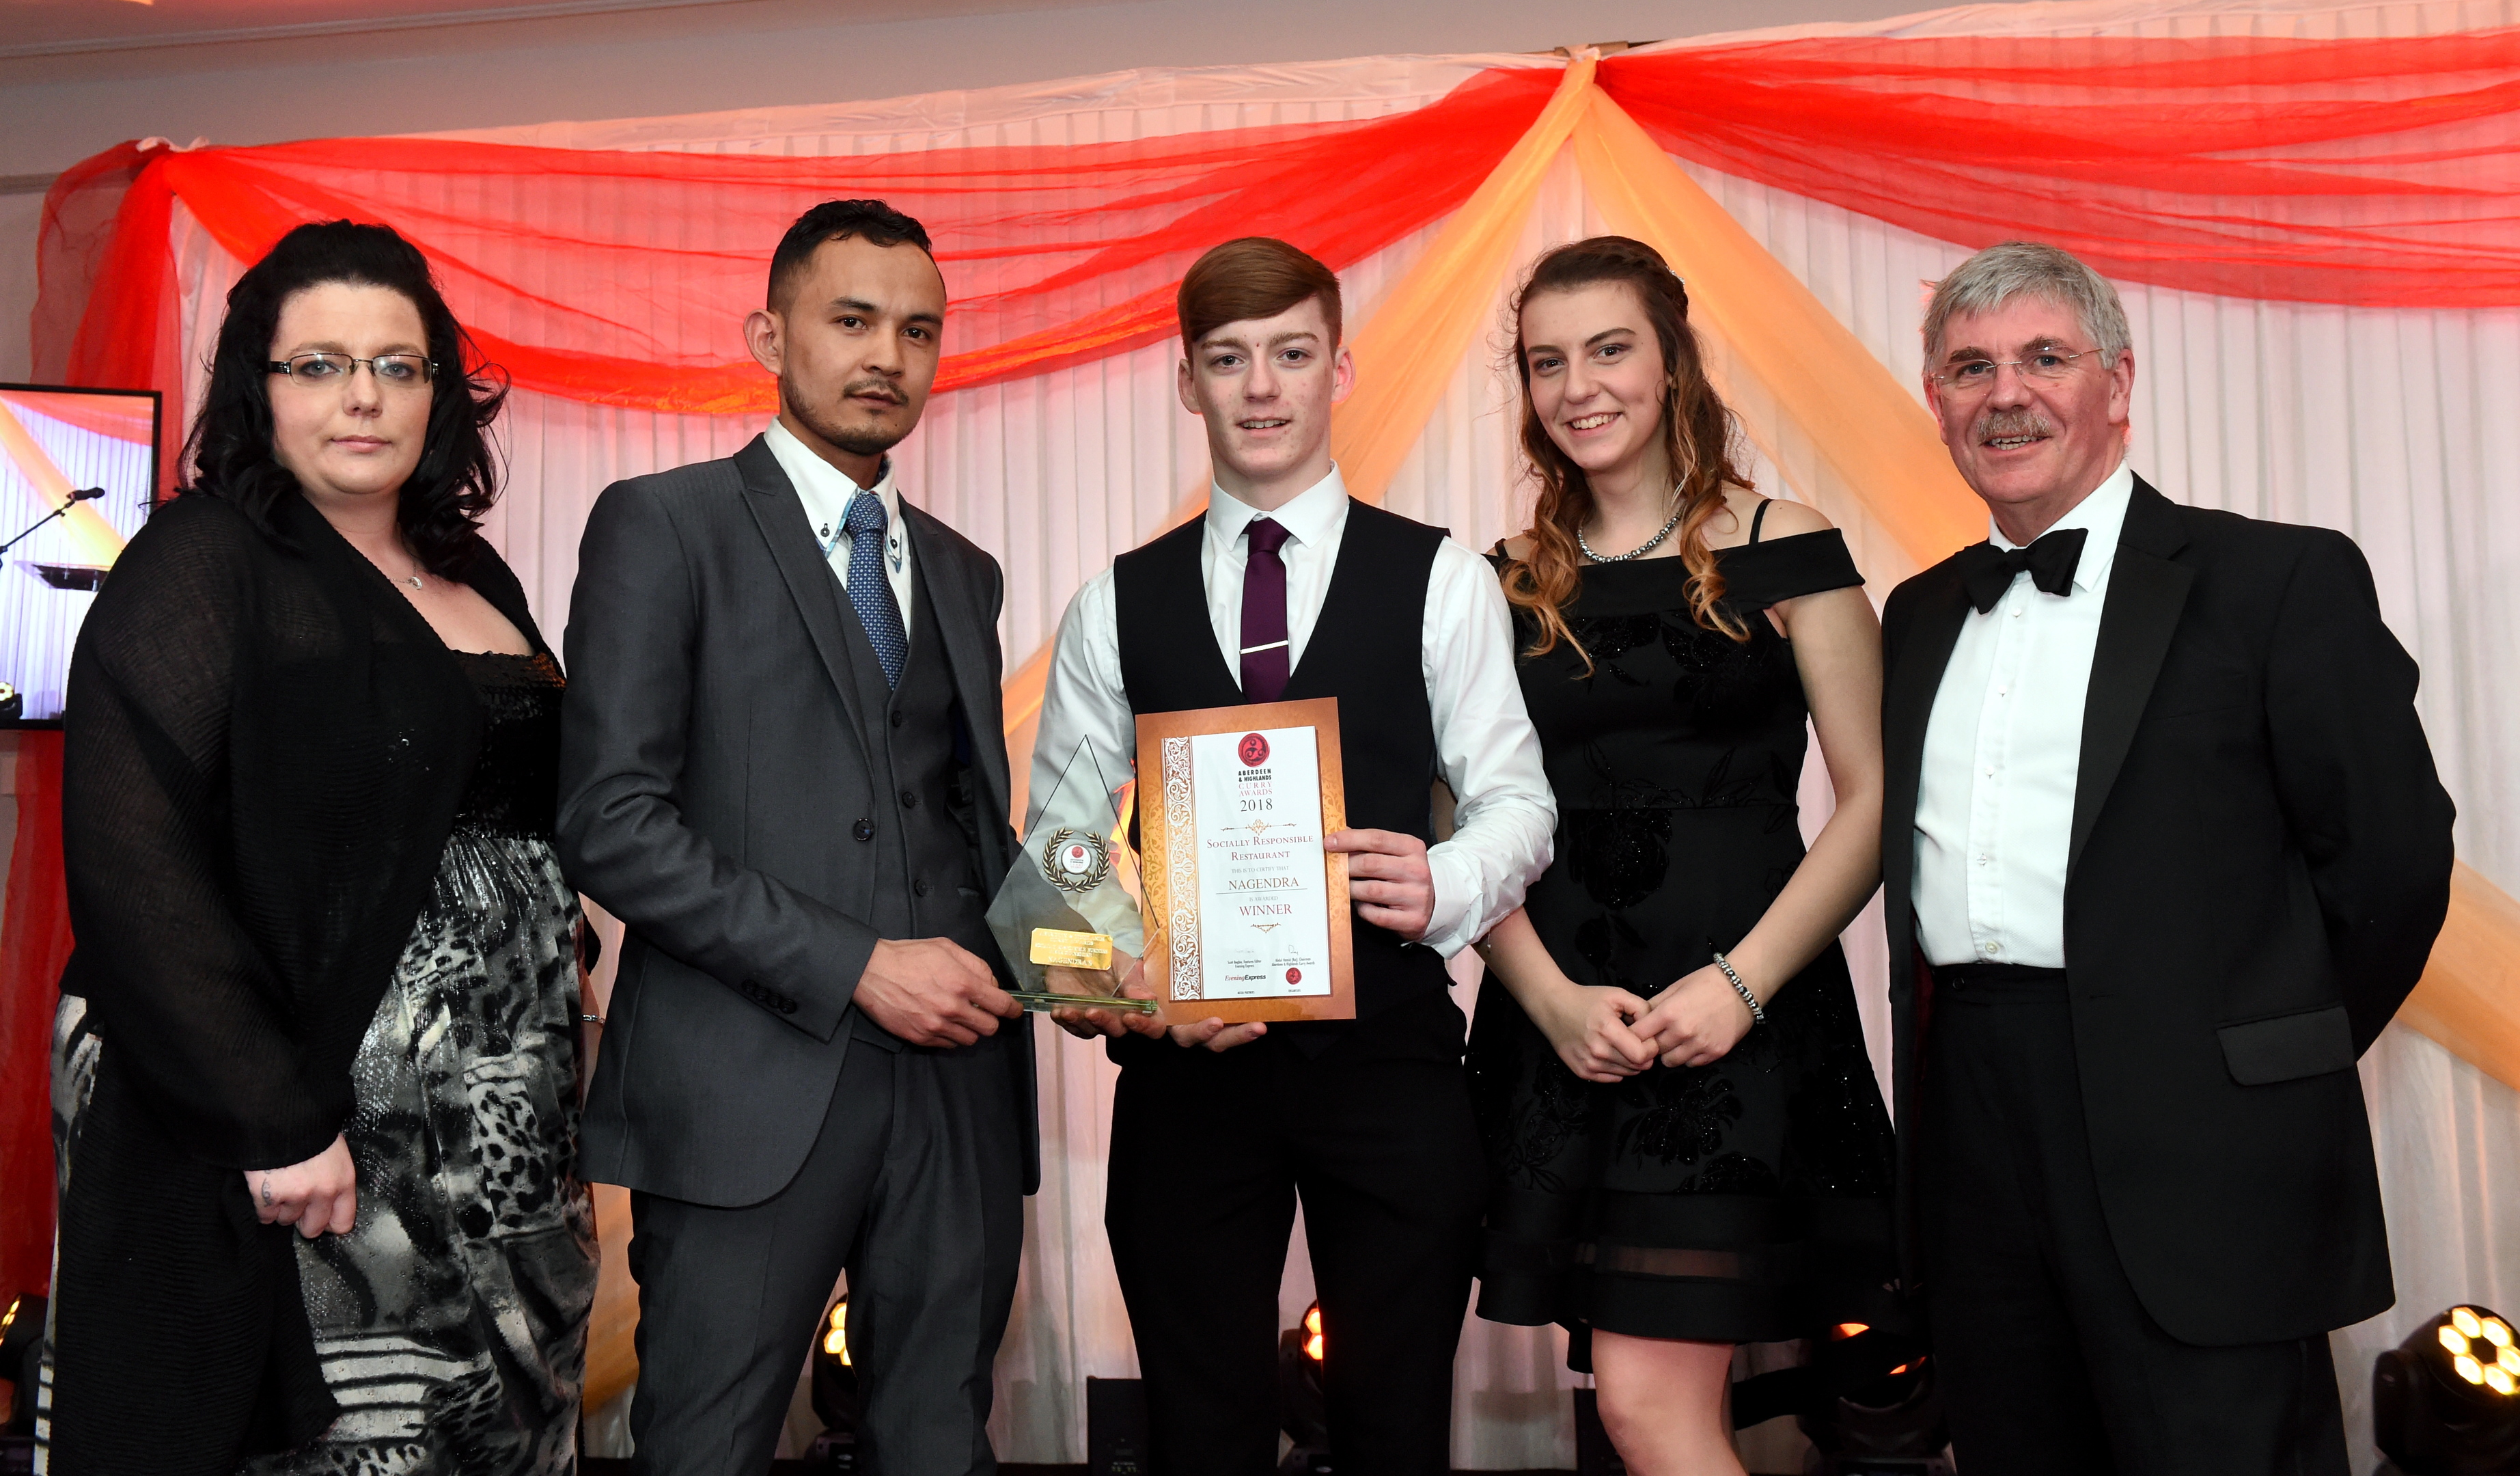 Pictured are the team from Nagendras collecting their award.